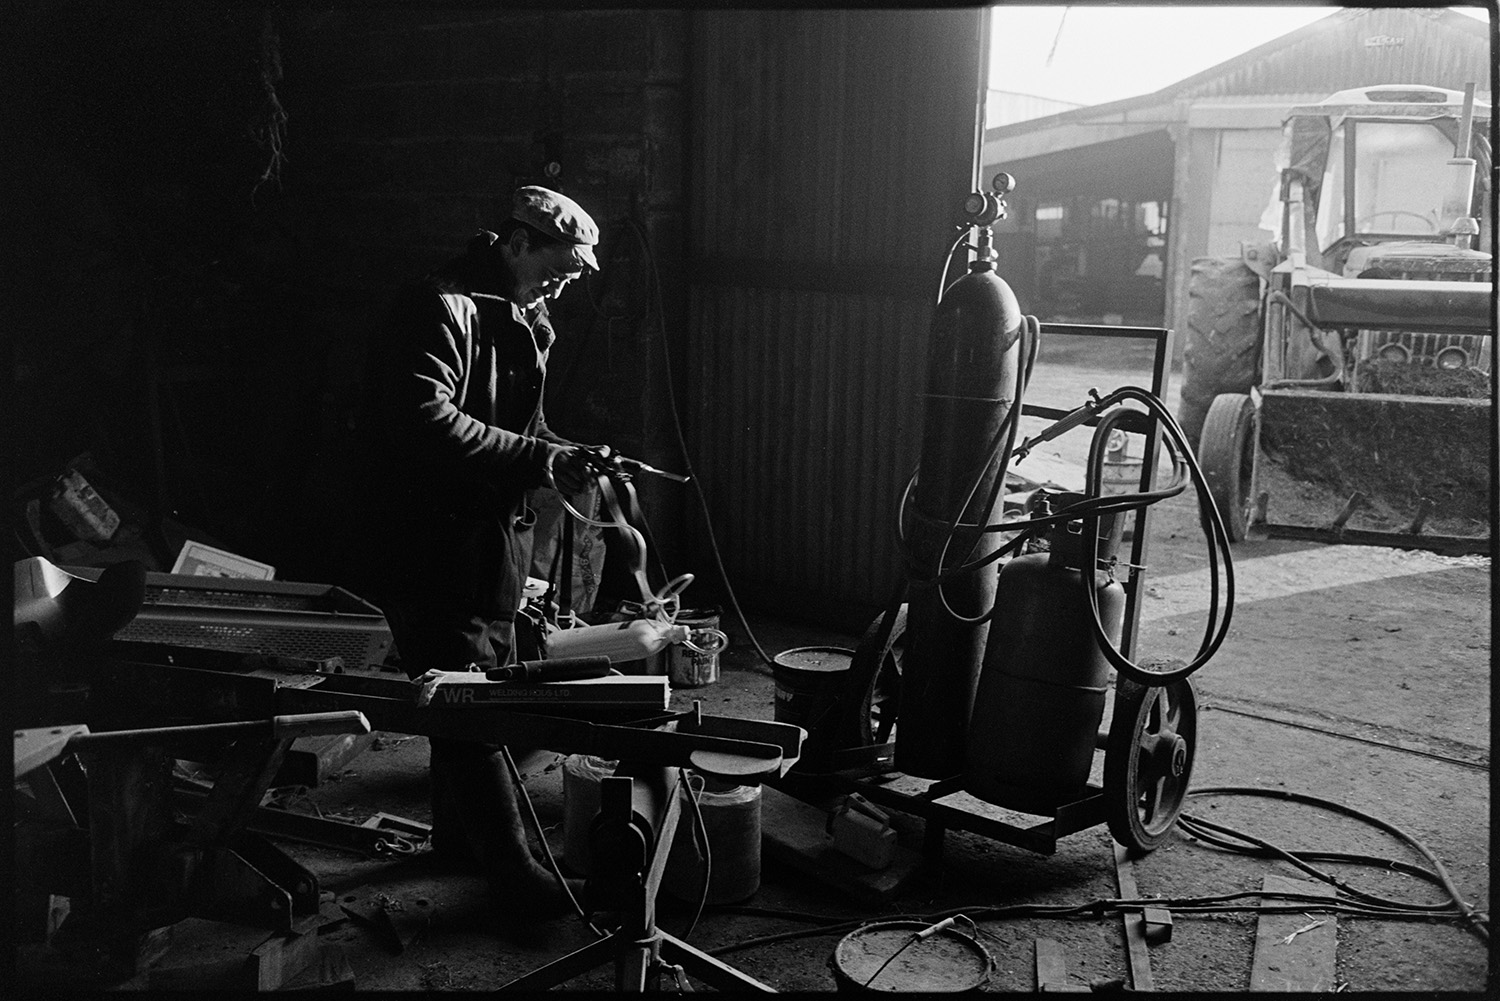 Farmer preparing welding torch in shed. 
[Bill Crocombe preparing a welding torch in a barn at Parsonage Farm, Chulmleigh. Two gas canisters are on a sack truck next to him and a tractor is parked in front of another barn in the farmyard.]